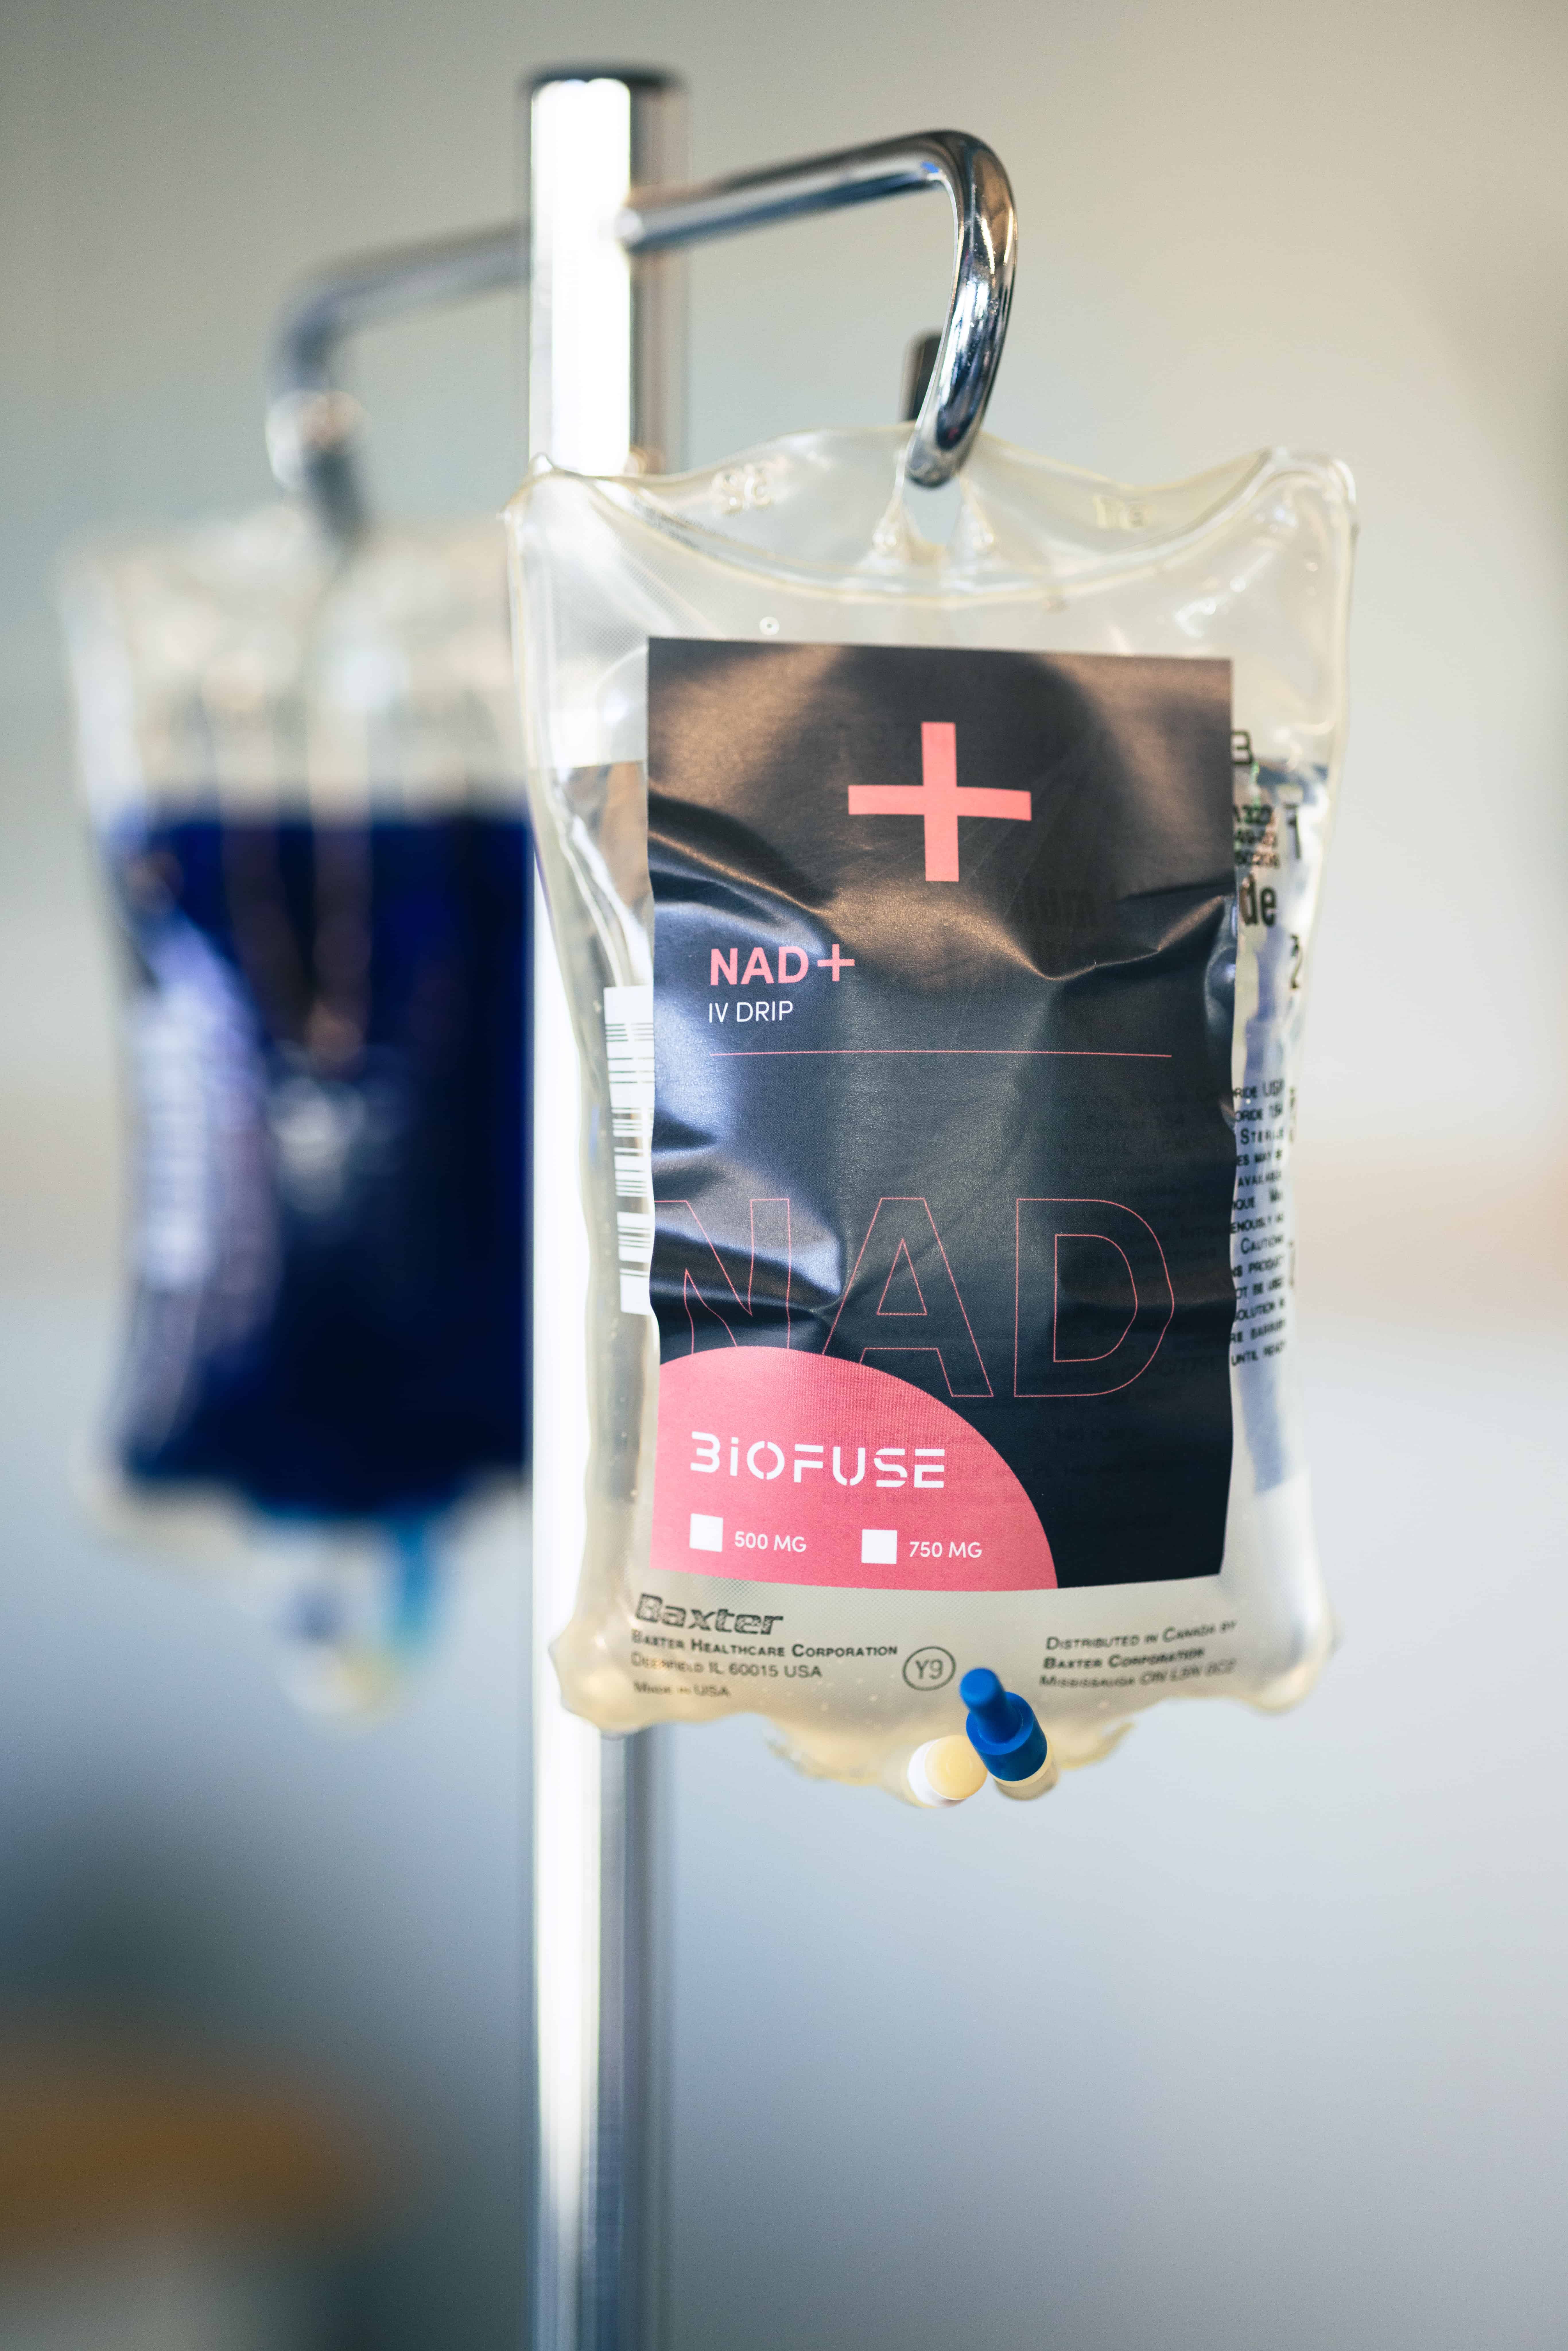 A bag of NAD+ IV solution hanging on a stand, clearly labeled, promoting the specialized treatment options available at Biofuse for enhanced cellular health.